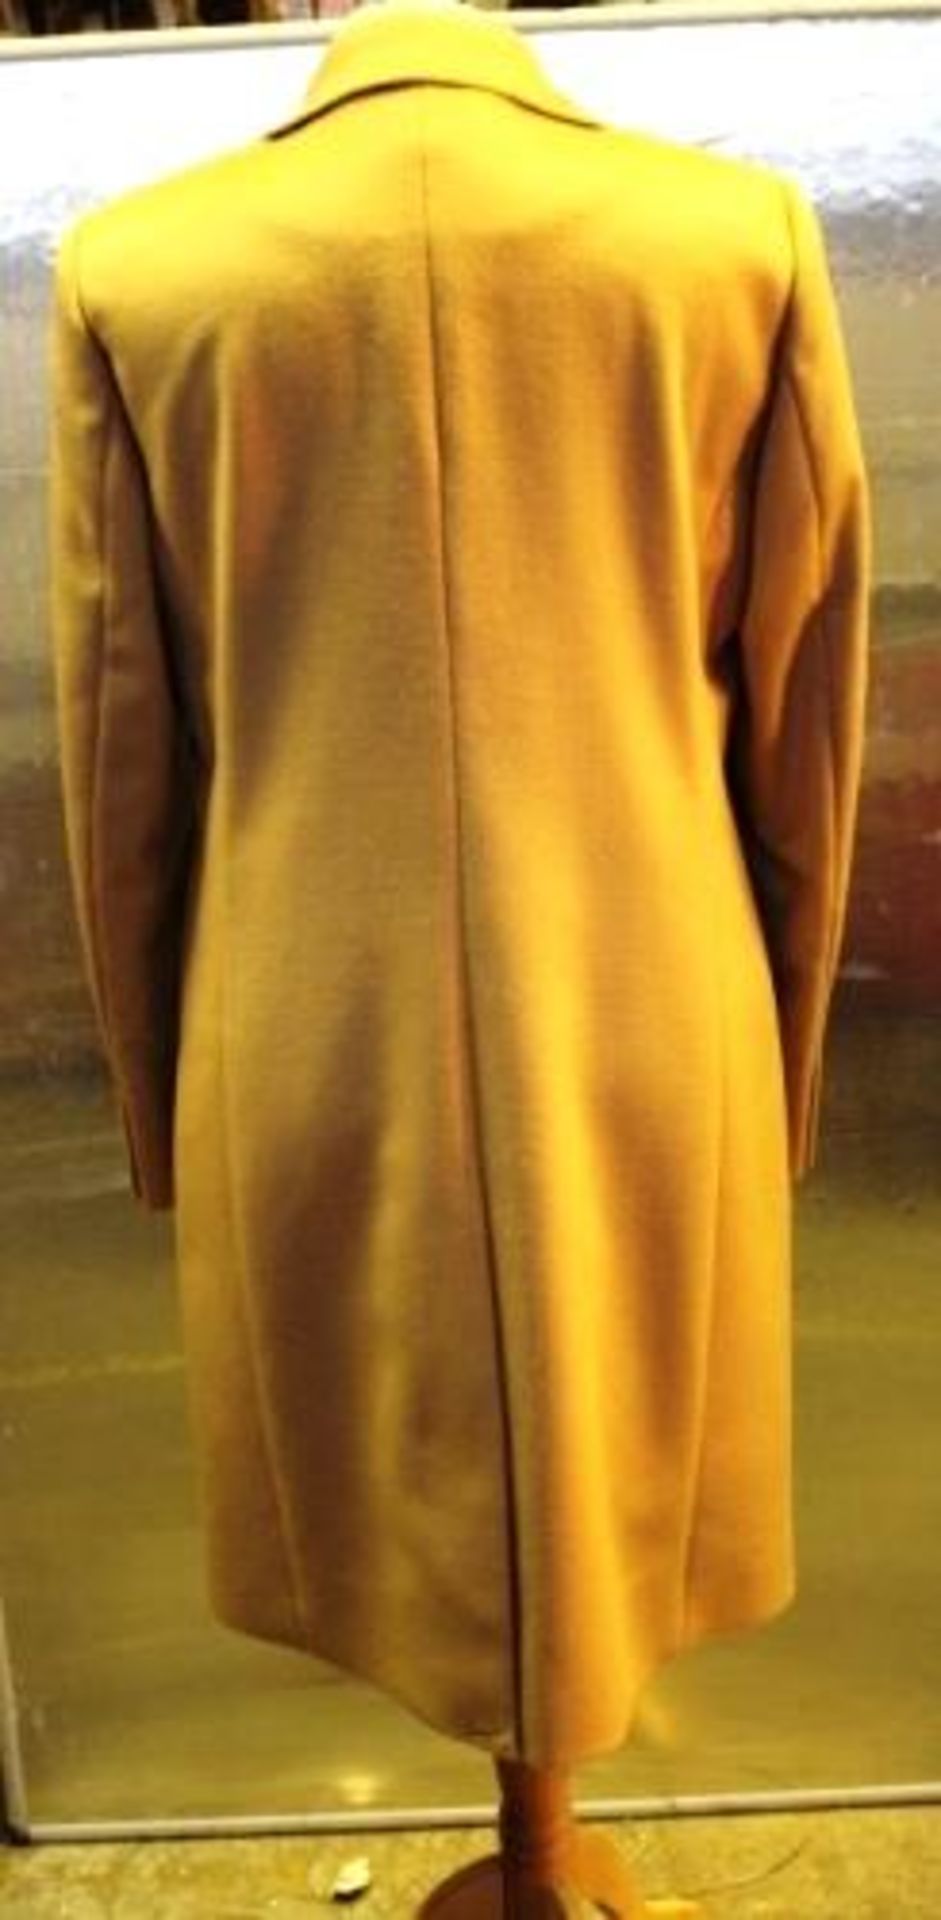 1 x Hobbs Tilda camel wool coat, UK size 8, RRP £299.00 - New with tags (clothesrail1) - Image 2 of 2